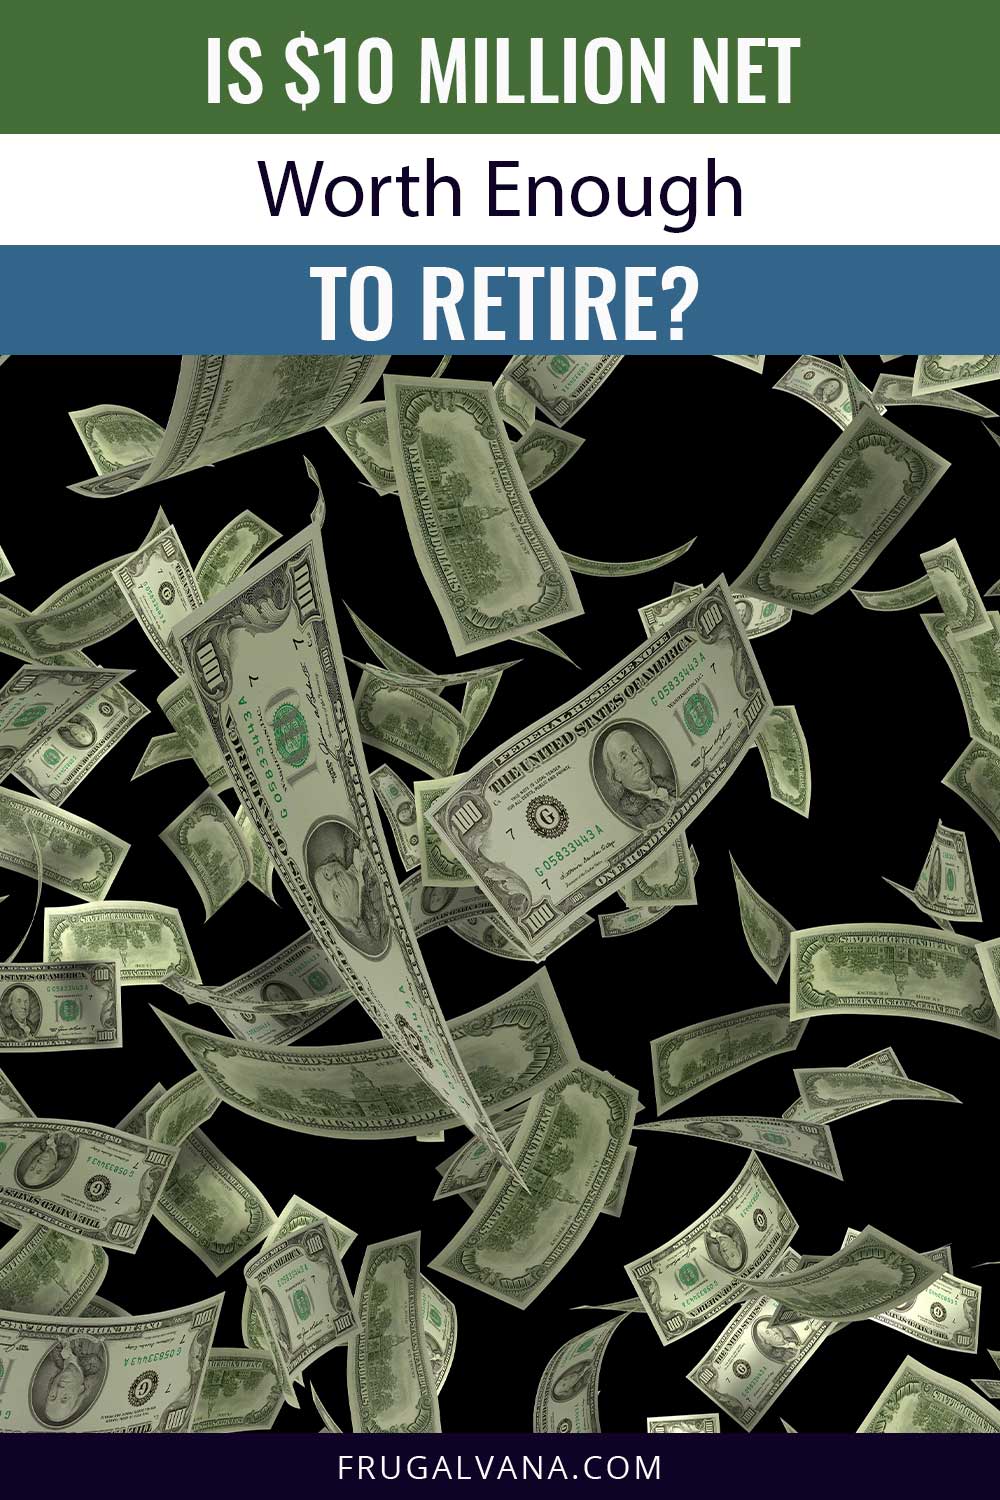 Is $10 Million Net Worth Enough to Retire?